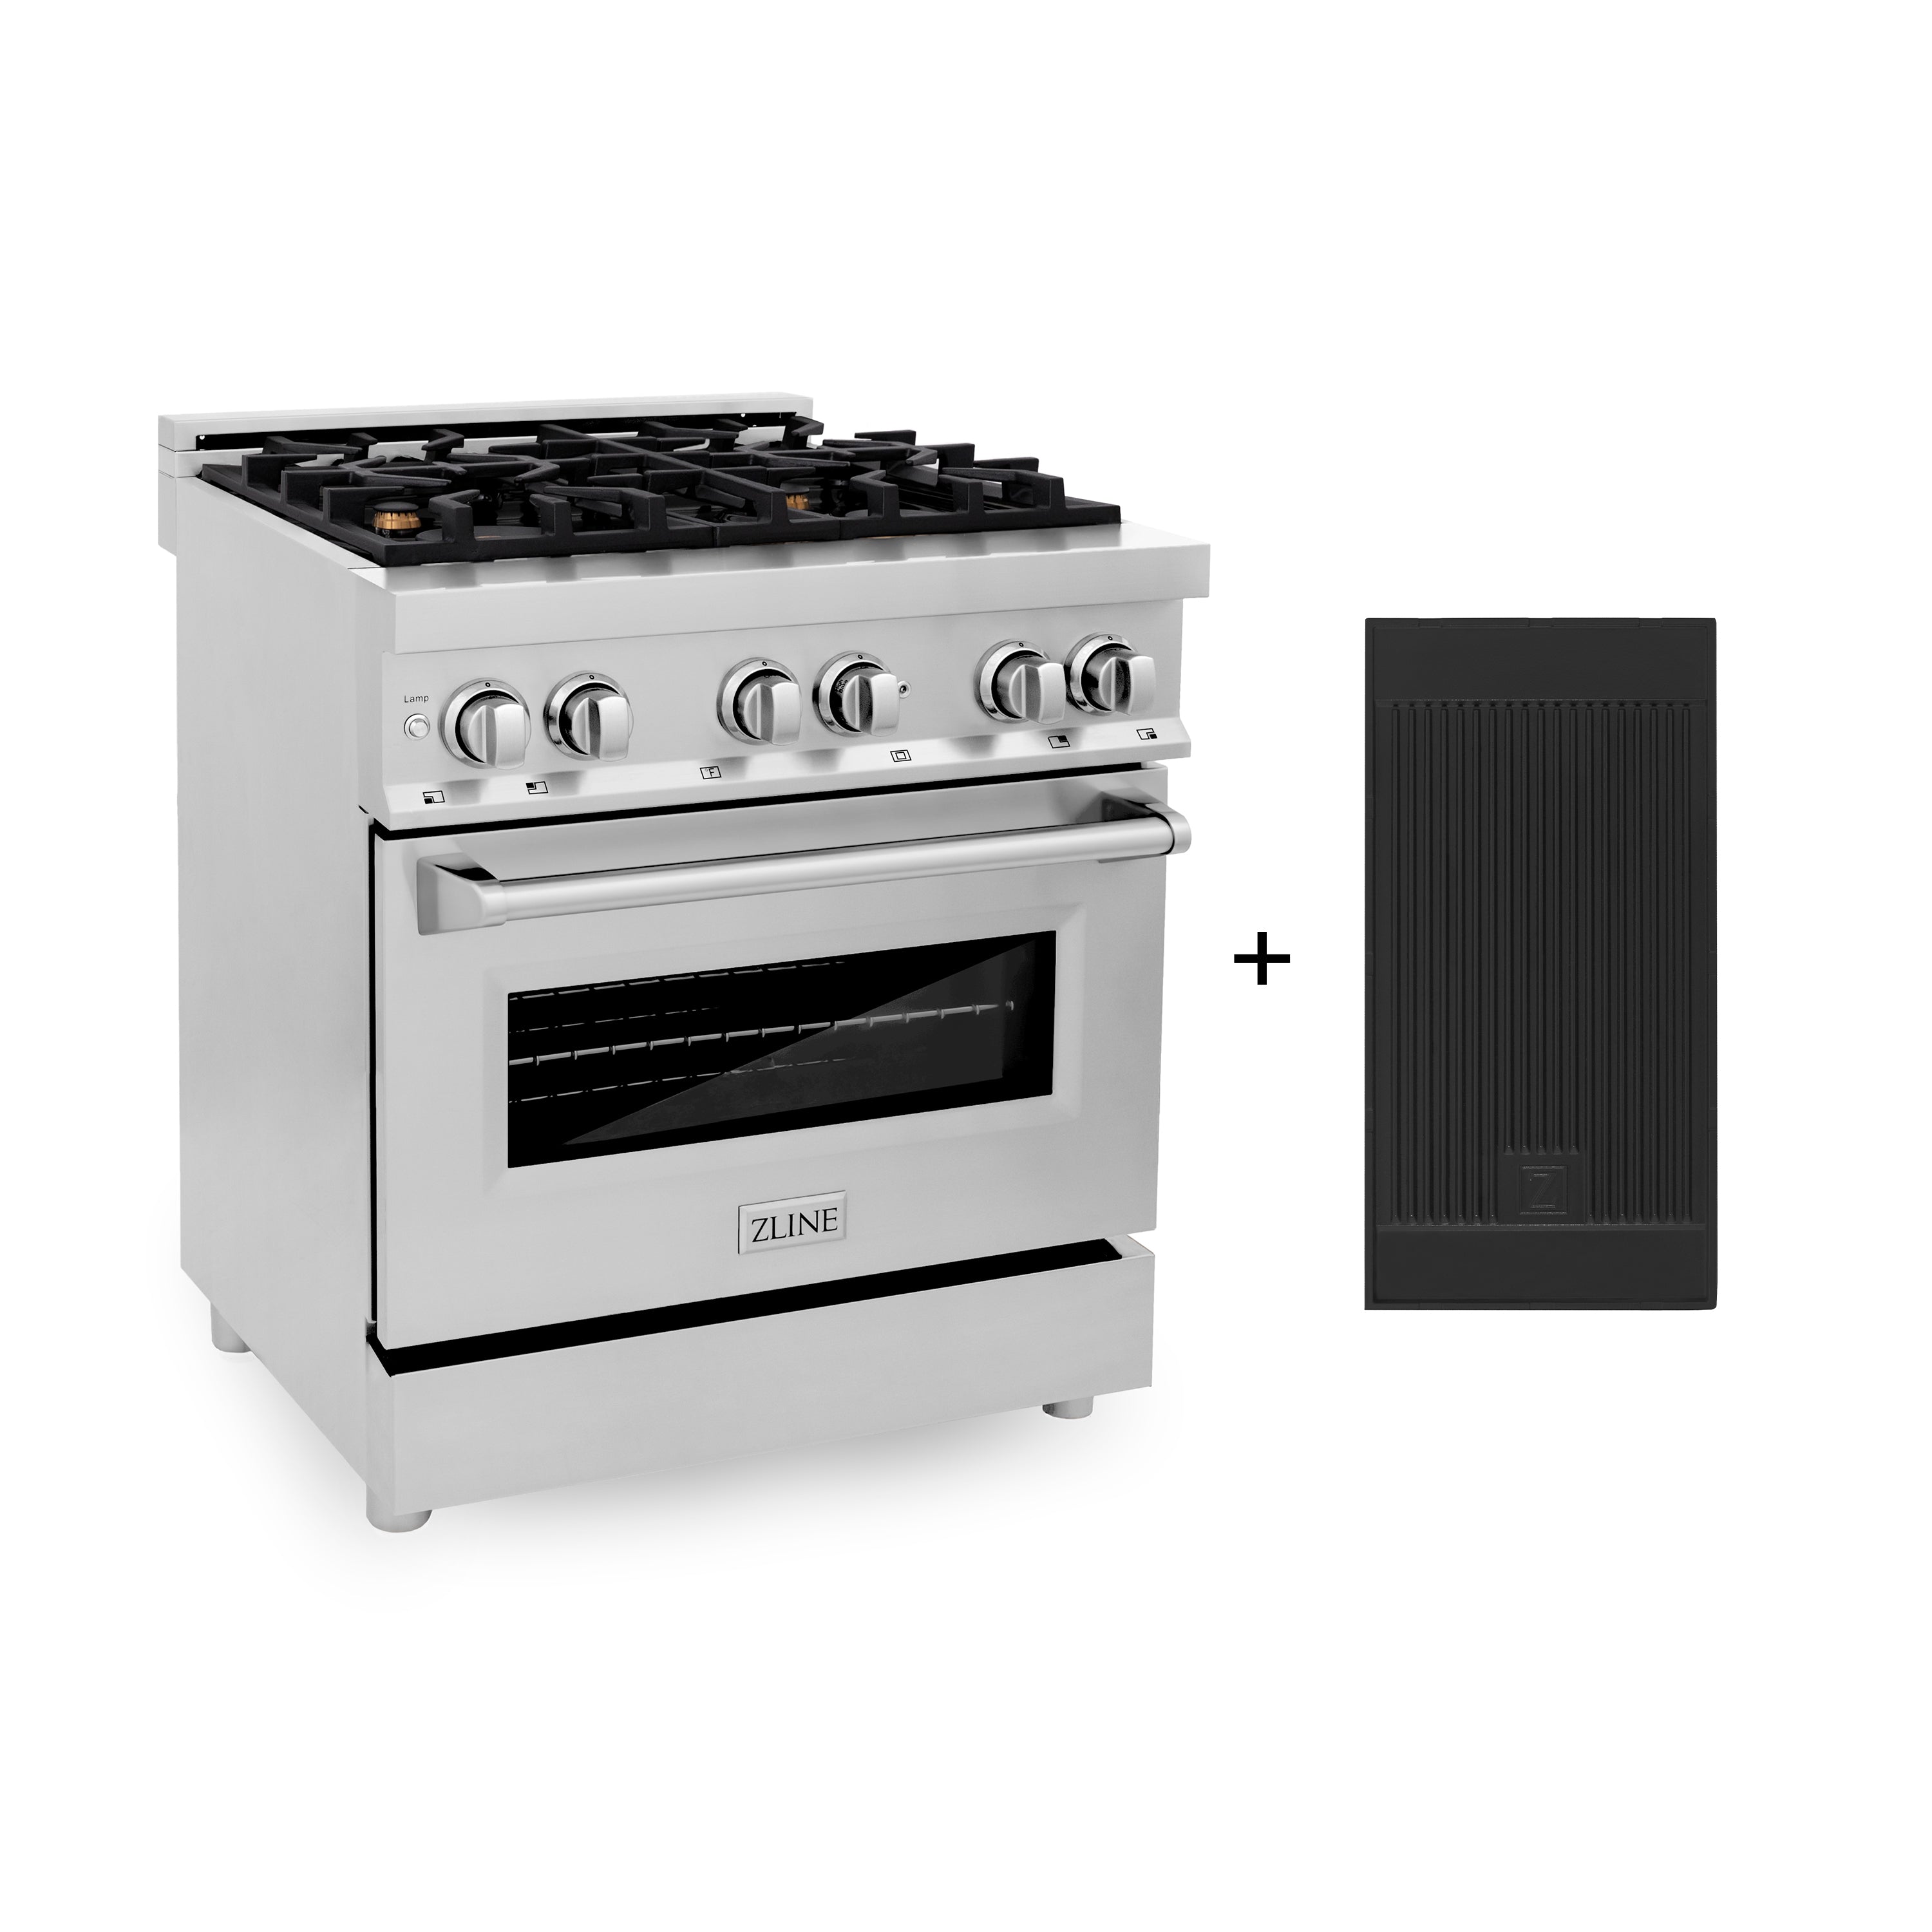 ZLINE 30" 4.0 cu. ft. Electric Oven and Gas Cooktop Dual Fuel Range with Griddle and Brass Burners in Stainless Steel (RA-BR-GR-30)